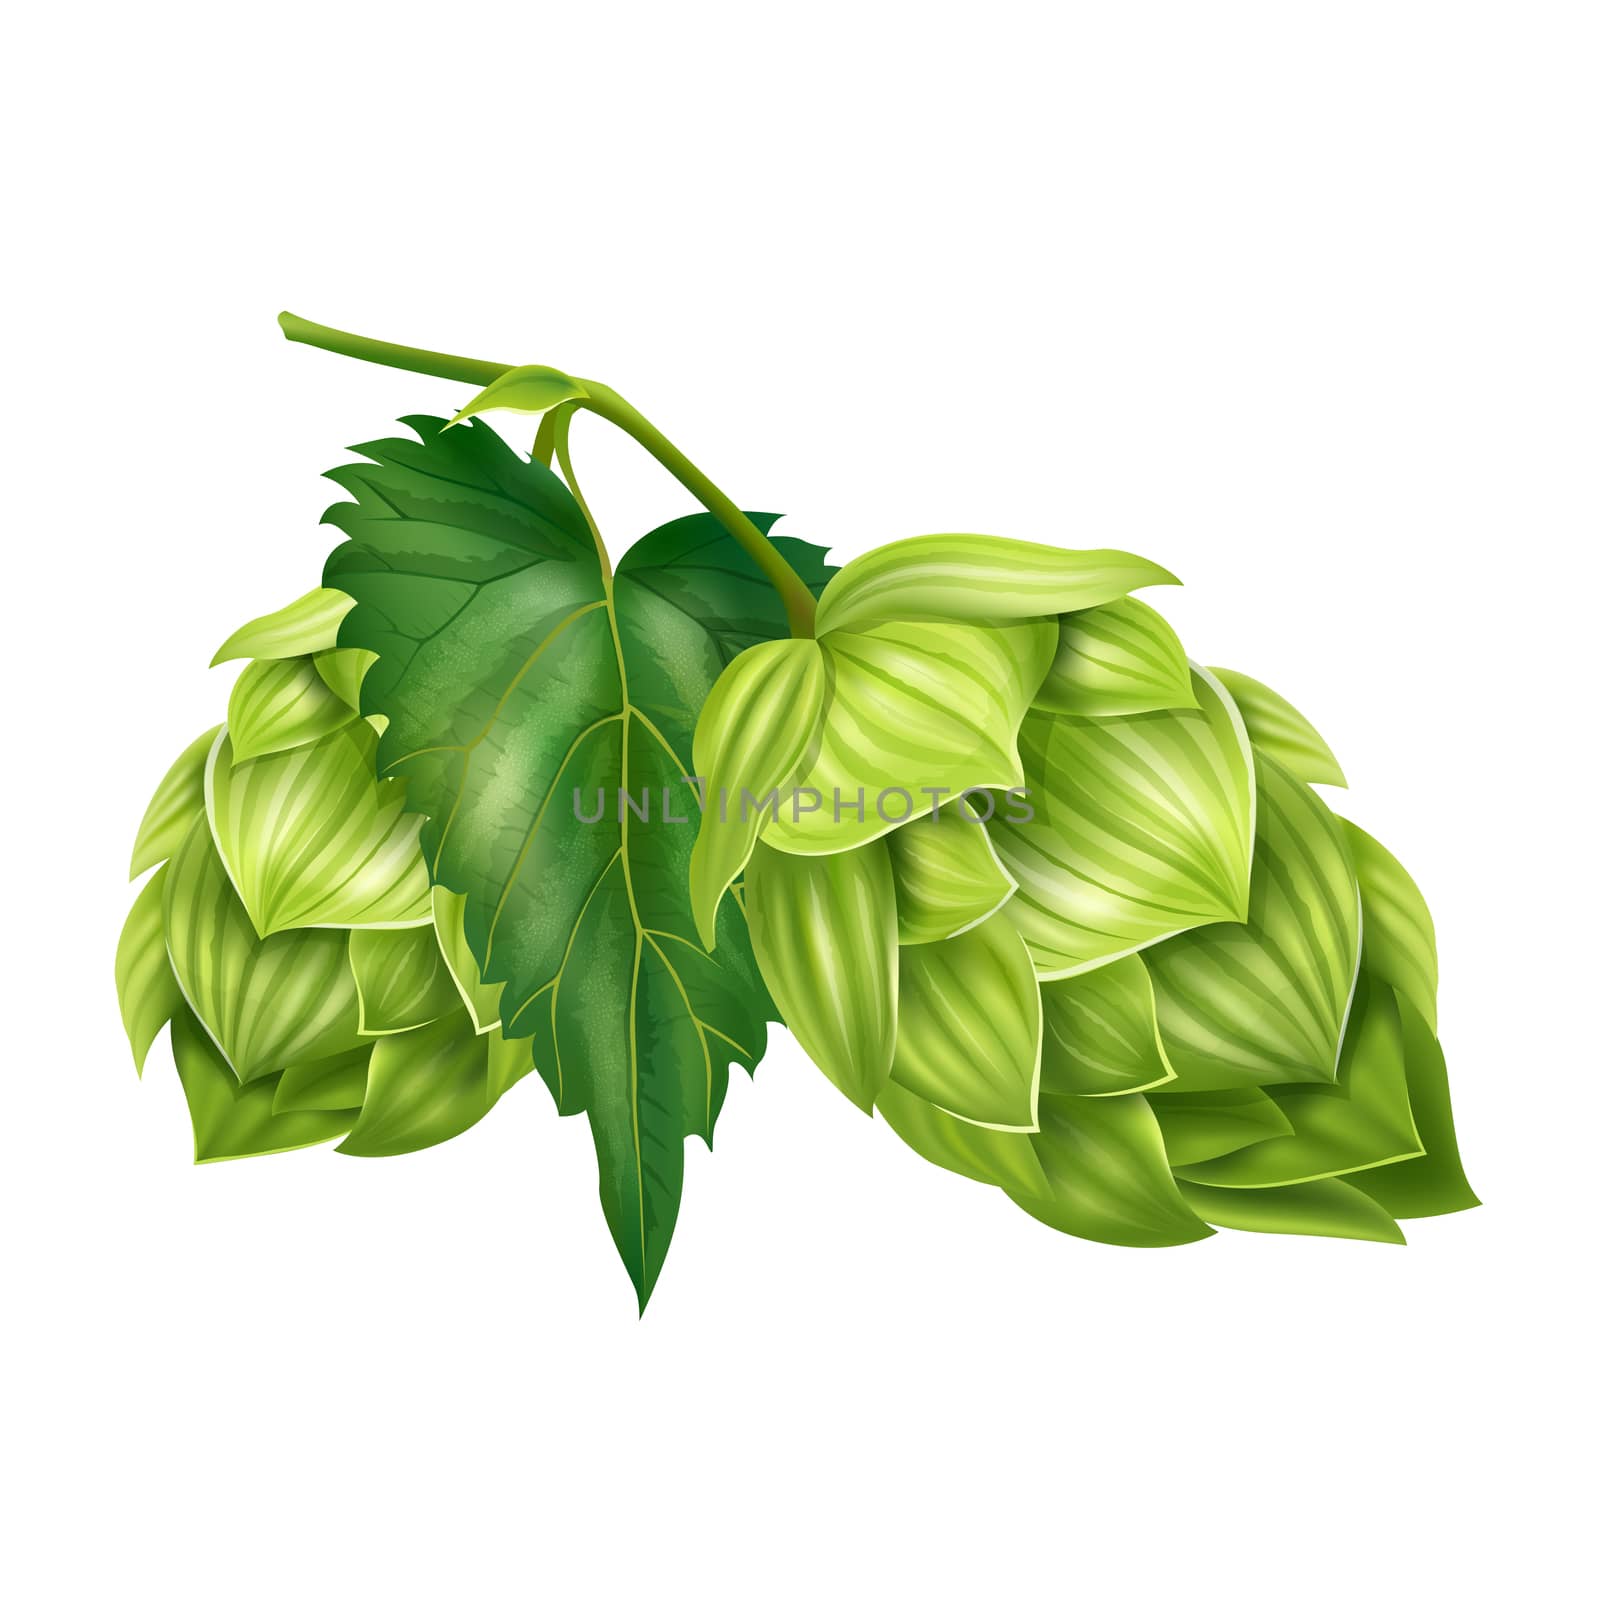 Hops on white background by ConceptCafe